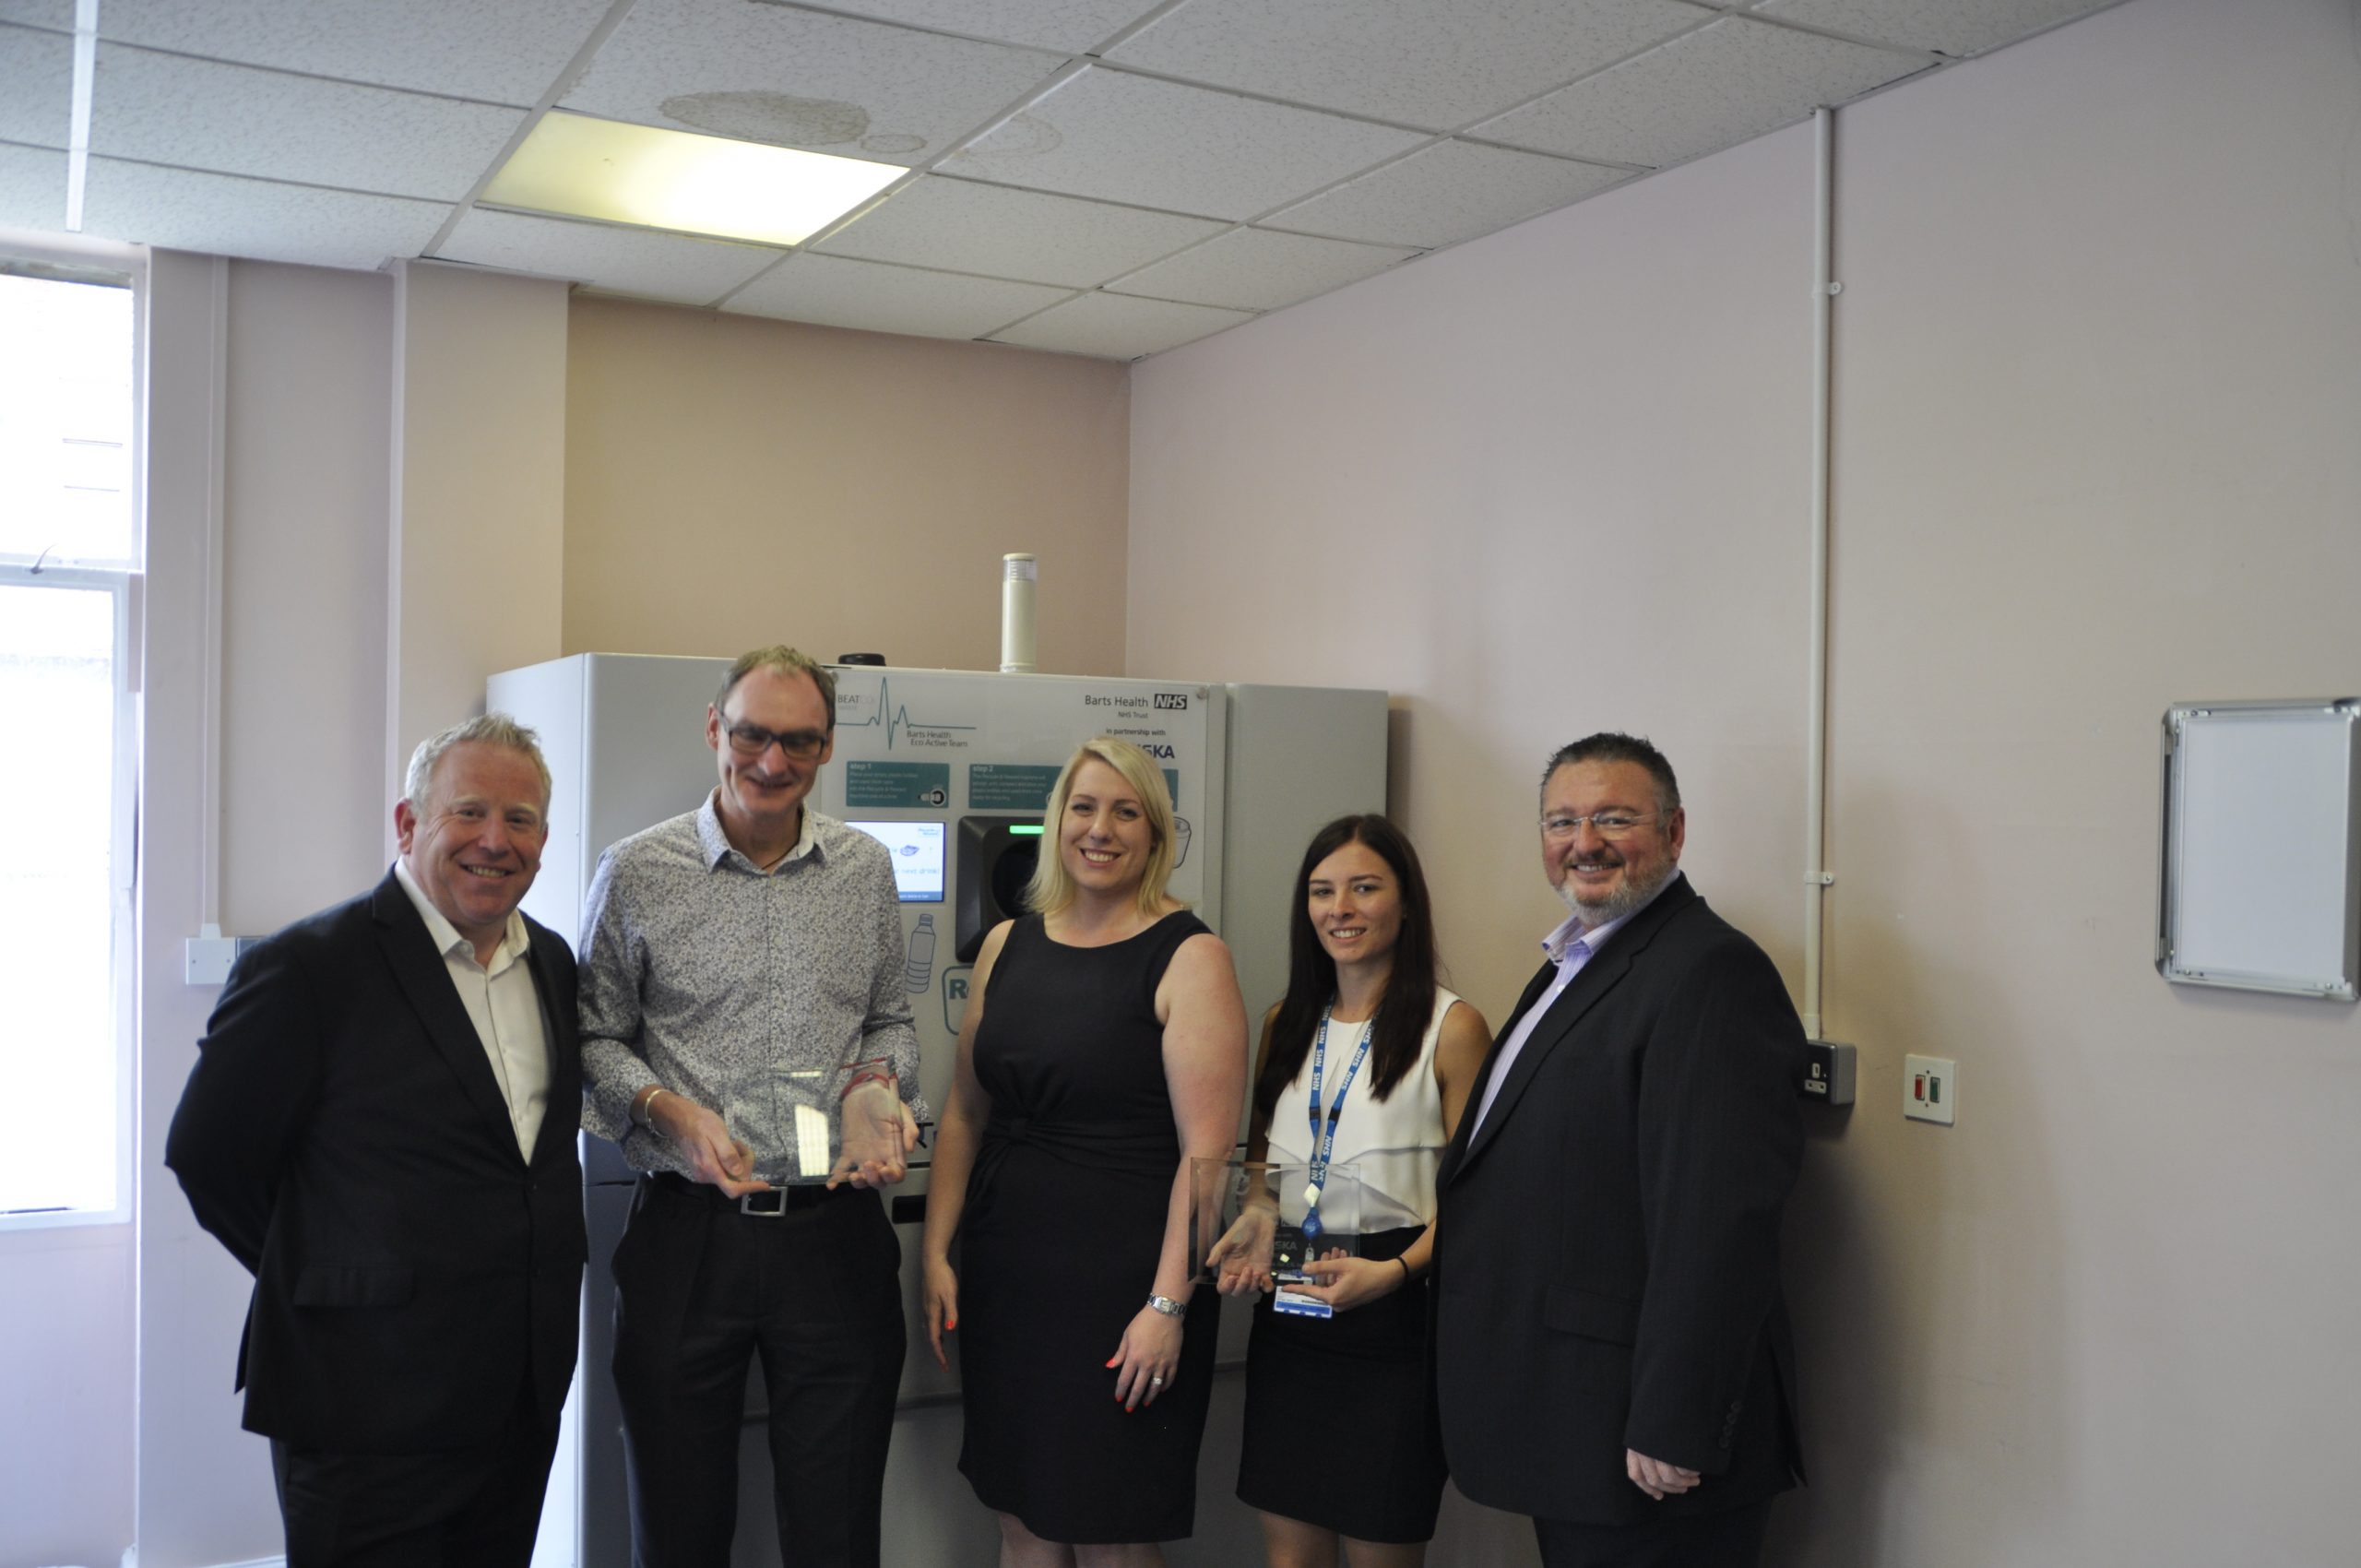 Barts NHS Trust Reverse Vending Award First NHS Trust Hospital in the UK to install a Reverse Vending Machine